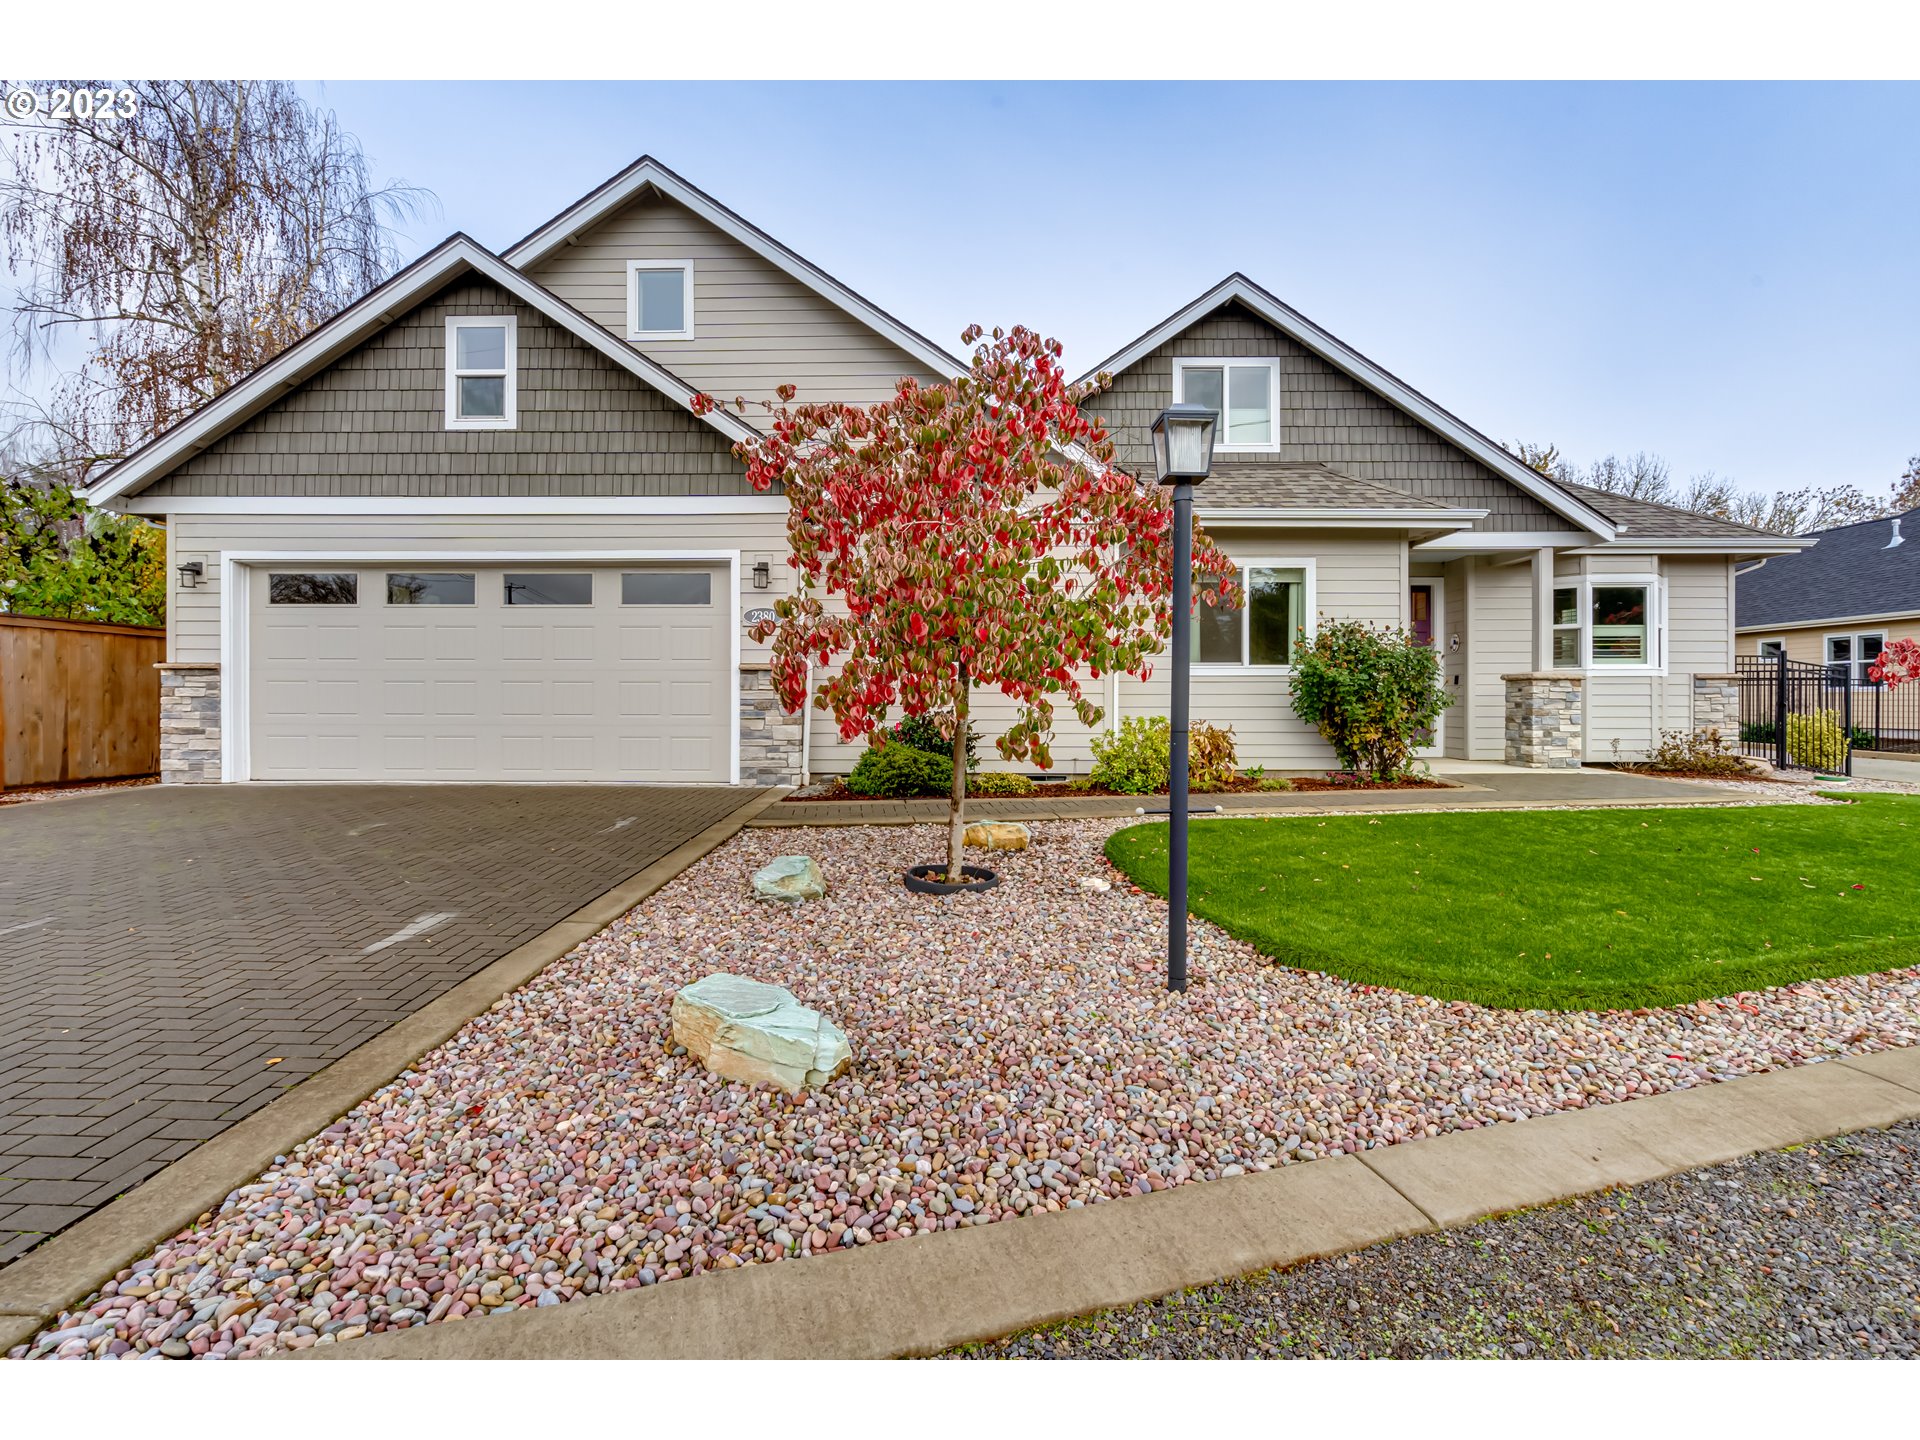 This is your opportunity to live in one of Eugene's most sought after neighborhoods.  Comfortably located in the Ferry street Bridge area, this beautiful Custom Built home by Tom Walter provides quality, comfort and remarkable walk-ability to shopping, schools, parks and entertainment.  You'll be pleased to find that all primary living spaces are located on the main level. Relaxing best describes the Primary Bedroom, with ample space and a gas fireplace you can't help but unwind in this room.  The en-suite welcomes you with heated tile flooring, soaking tub, walk-in shower and double sinks.  There are three other comfortably sized bedrooms and a beautiful second bathroom on this level.  The Kitchen provides an outstanding space for cooking or entertaining and is a baker's delight with all the counter space the large island provides. It's open to the living and Dining rooms so you can enjoy your family and guests. Pull out shelves and a pot filler add ease to your culinary functions. Quartz countertops are used throughout the home to offer beauty and durability and Built-ins provide an abundance of storage.  Bonus and more Bonus is what you'll enjoy on the upper level, with three large spaces to enjoy there are endless possibilities, such as game room, kids playroom, craft room,, family room or an amazing home office.  There is also a half bath on this level.  You will really appreciate the low maintenance yard.  The vibrant green turf provides a lovely look all year long and requires little effort to maintain.  The covered patio and built-in gas hookup allow you to take advantage of your outdoor space year round.  There will be no worries about places to park with an oversized three car garage, large driveway and additional off street parking.  Don't hesitate to come take a look at this Fabulous Custom Home.